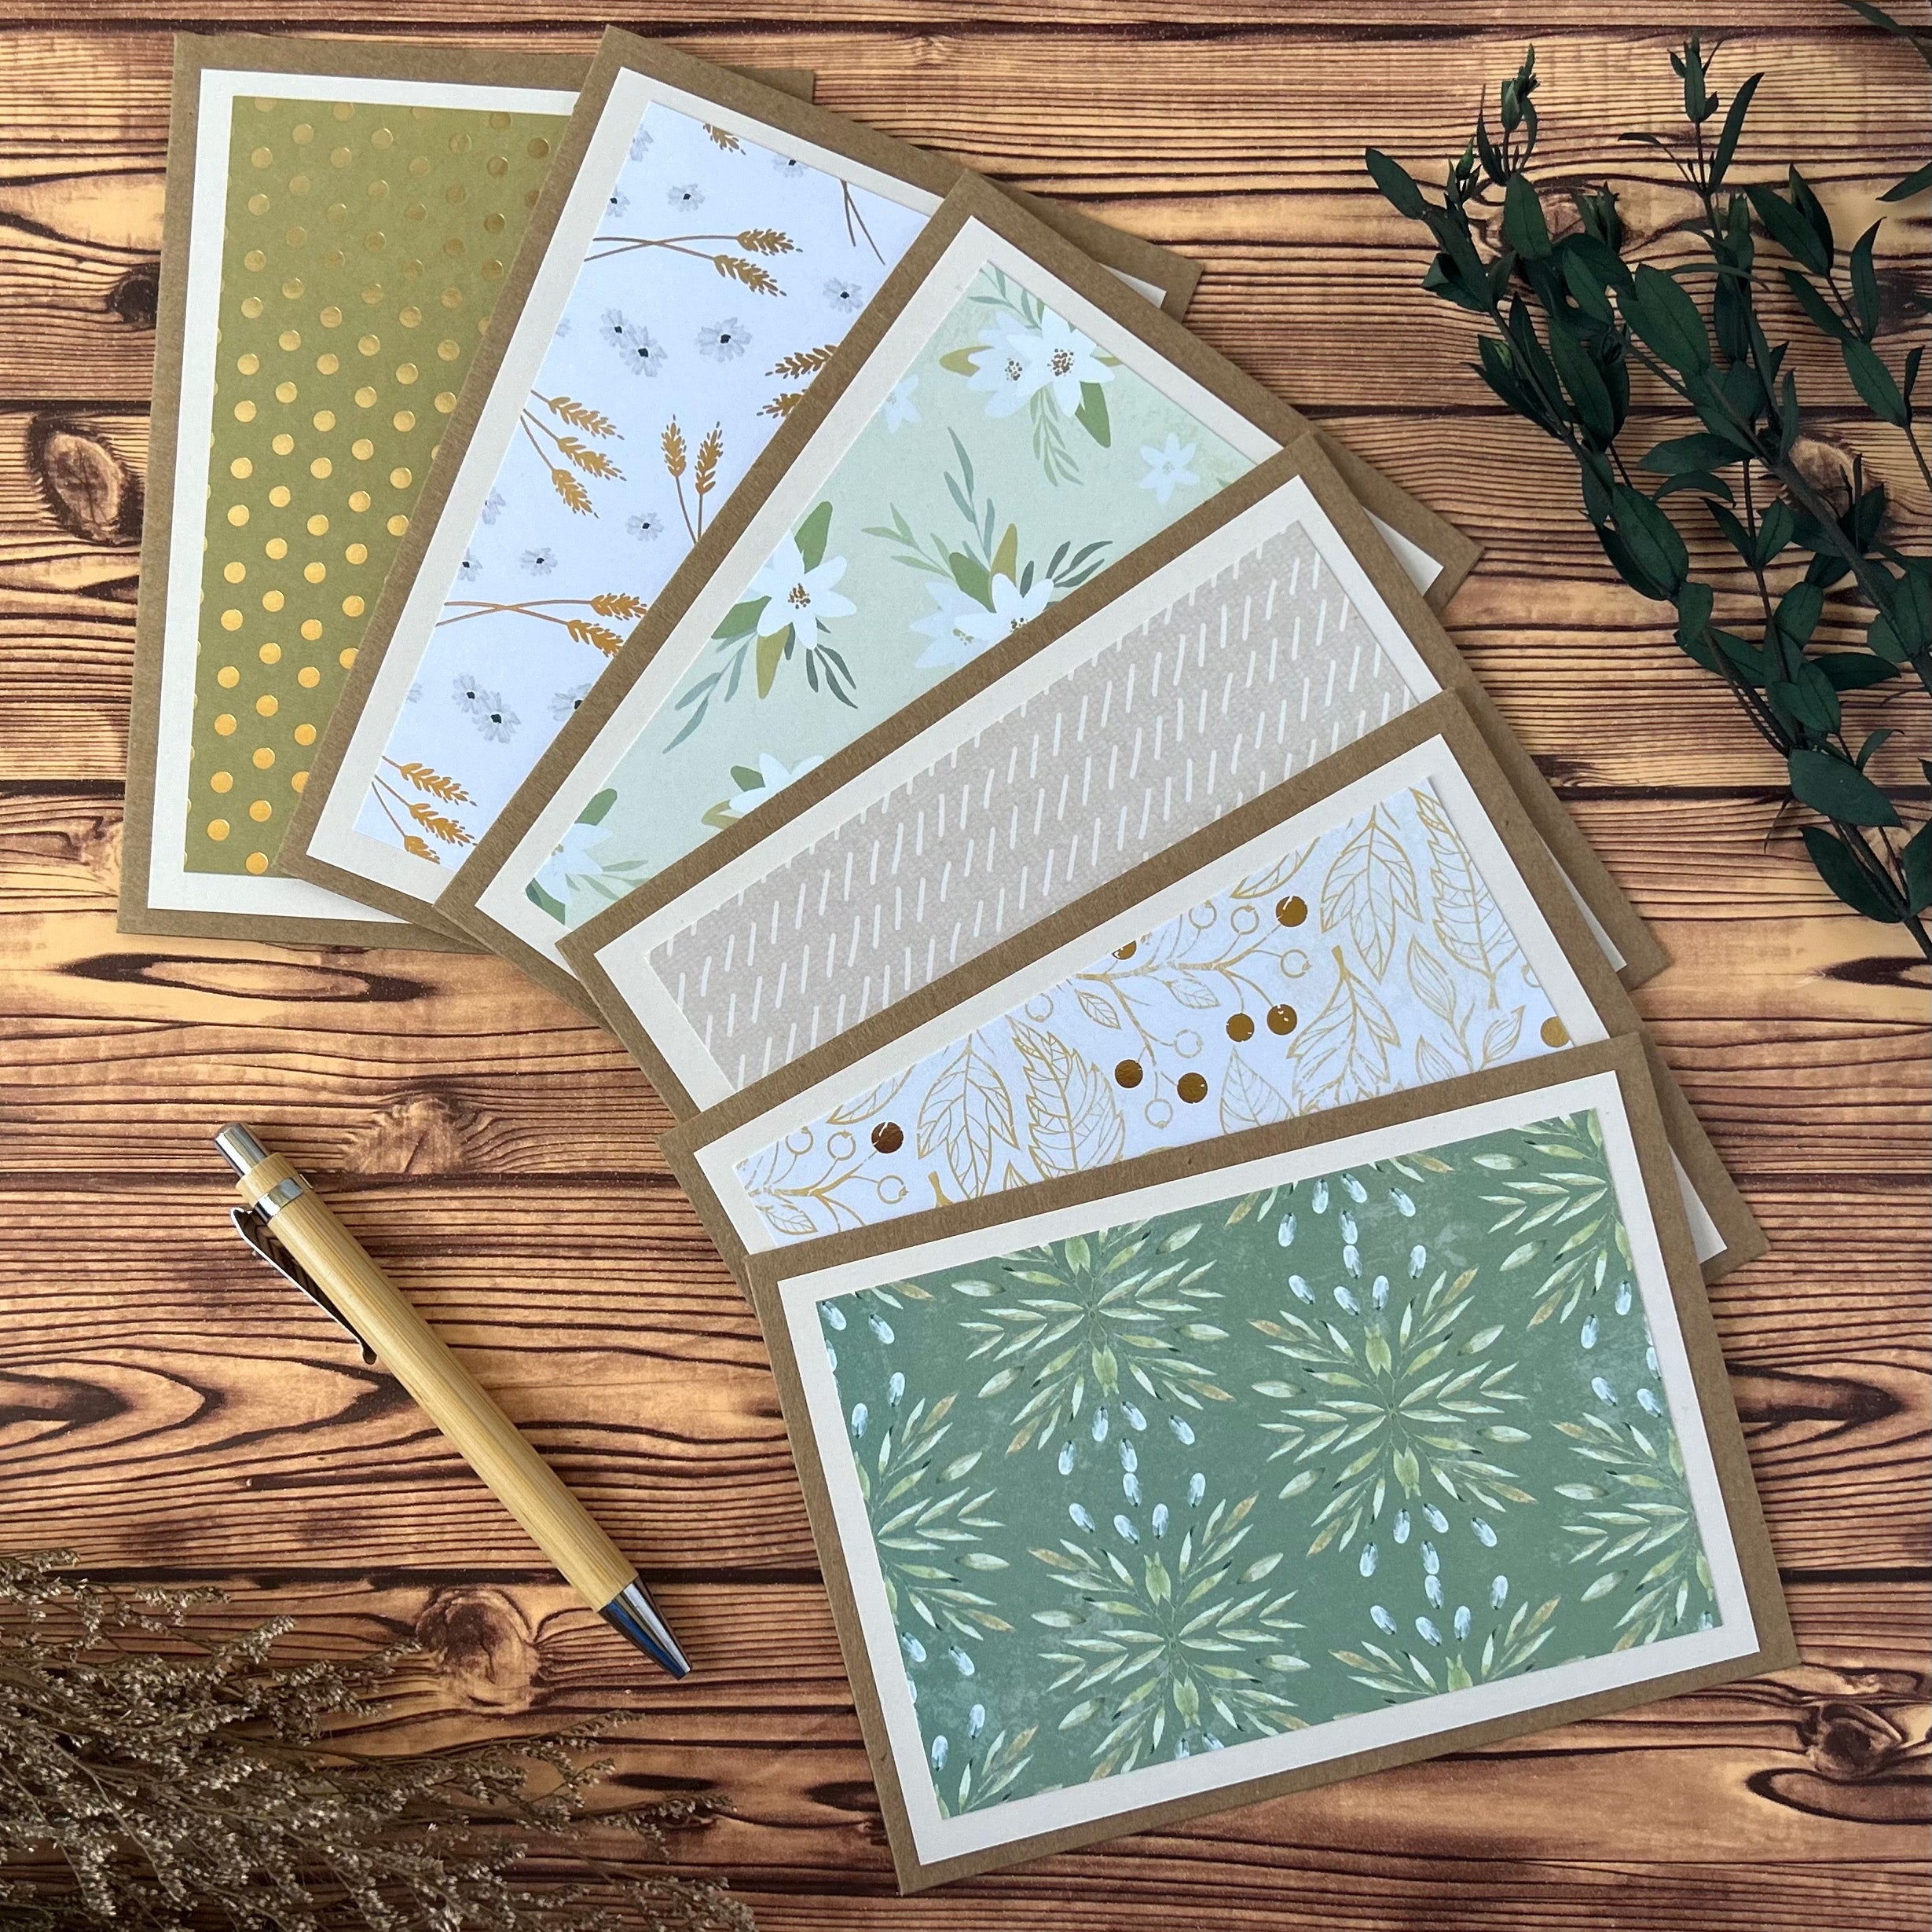 plant cards, card set, greeting cards, nature cards, handmade cards, birthday cards, floral cards, assorted greeting card box set, box of cards, handmade greeting cards for all occasion, handmade all occasions